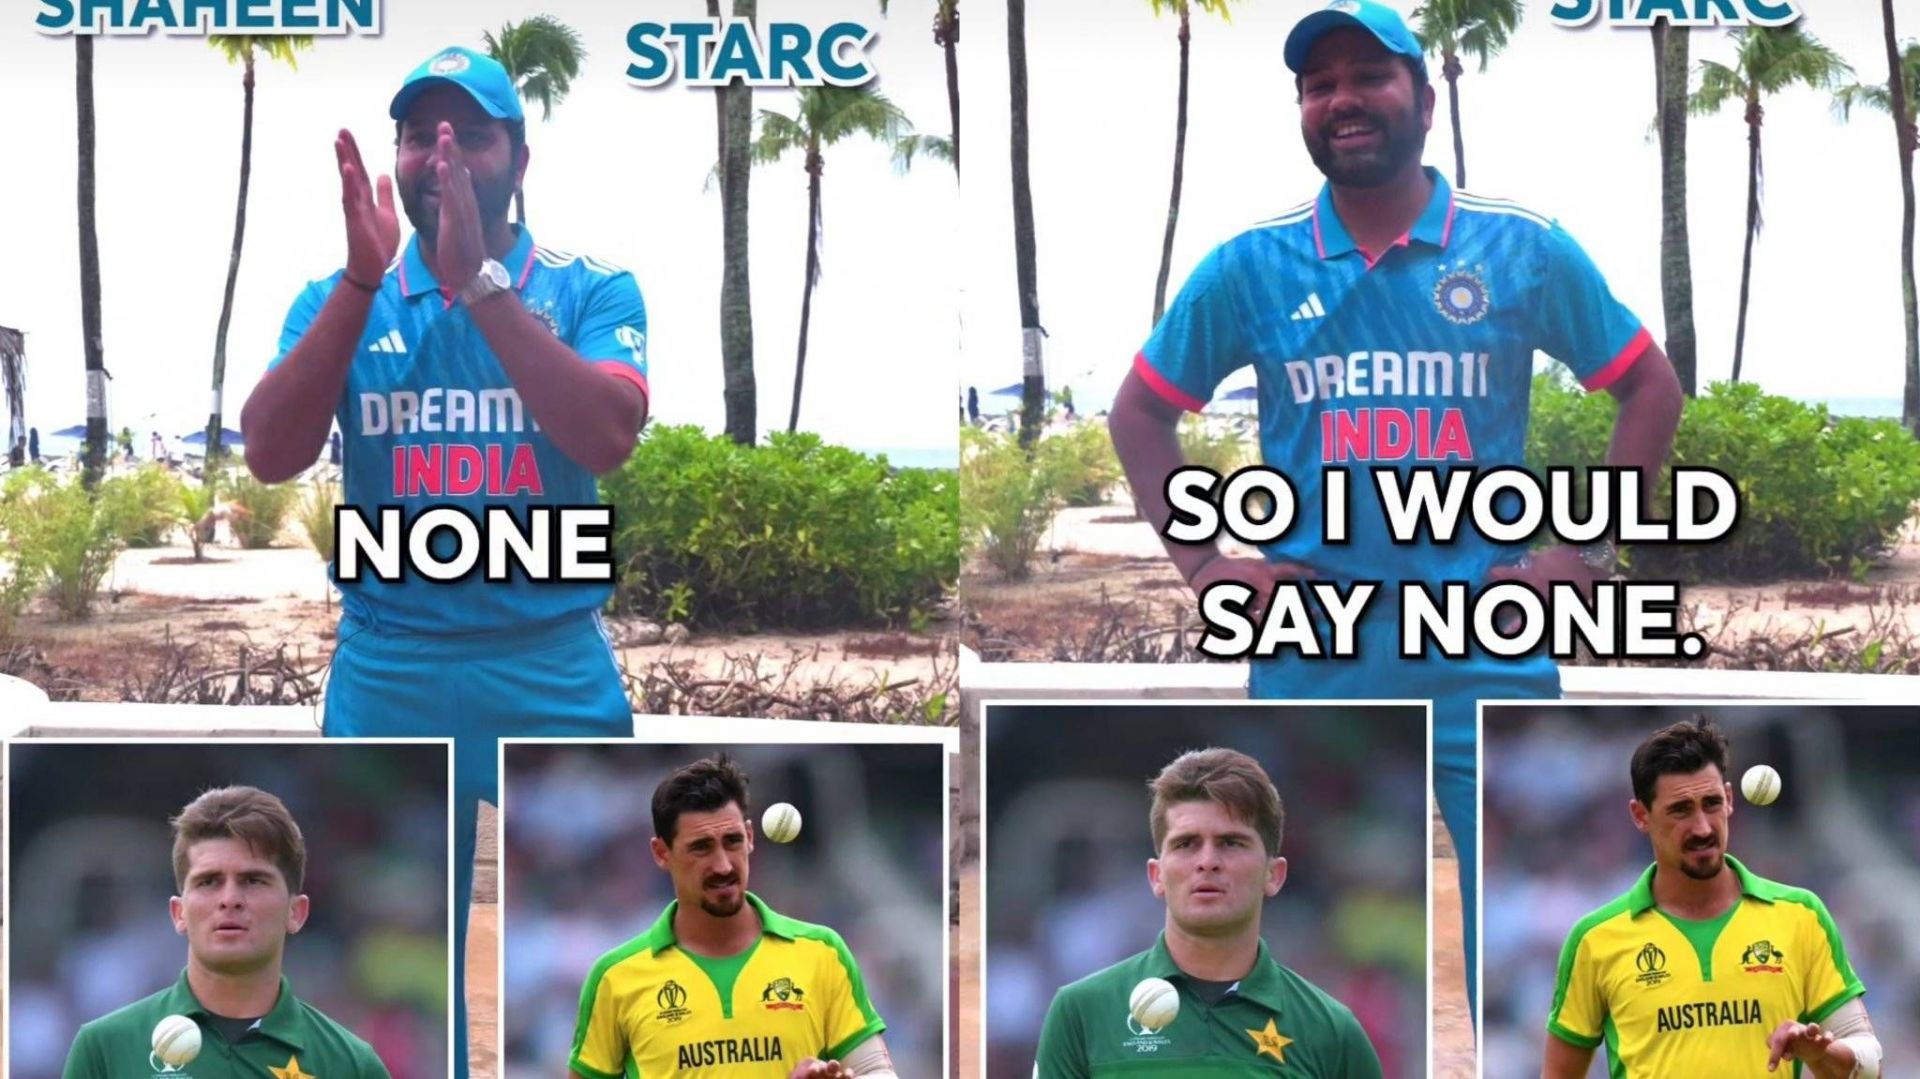 Rohit Sharma was asked to choose between Shaheen Afridi and Mitchell Starc (Image: Instagram)